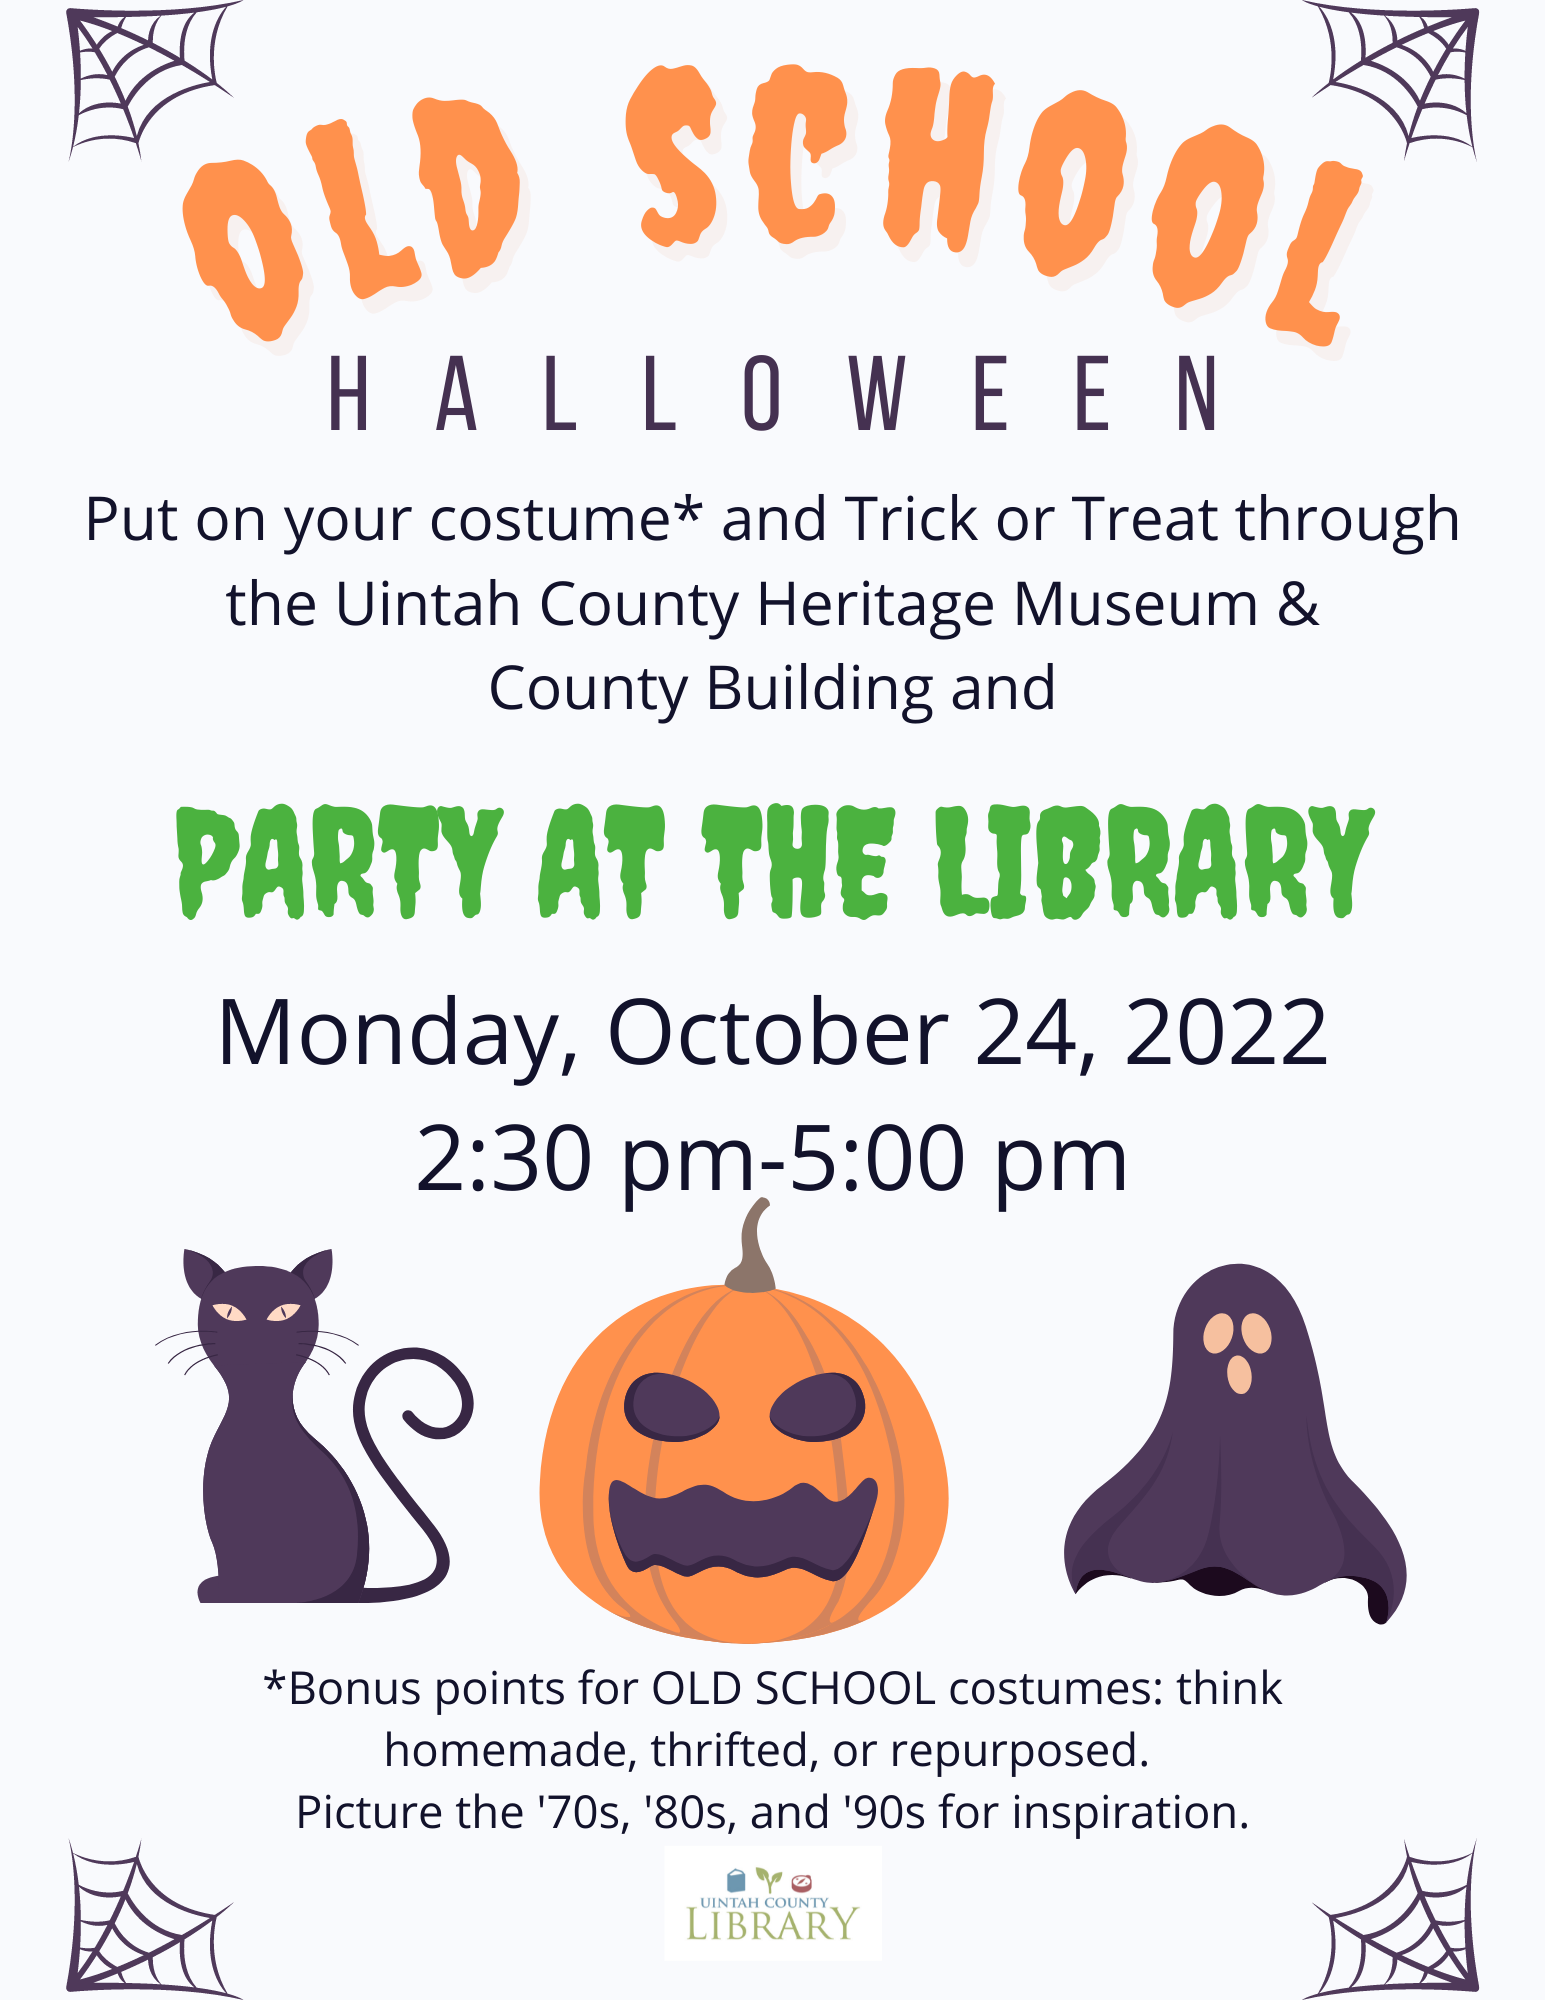 Join us for an Old School Halloween! Put on your costume* and Trick or Treat through the Uintah County Heritage Museum & County Building, and PARTY AT THE LIBRARY! | Monday, October 24, 2022 2:30 pm - 5:00 pm | *Bonus points for OLD SCHOOL costumes: think homemade, thrifted, or repurposed. Picture the '70s, '80s, and '90s for inspiration.